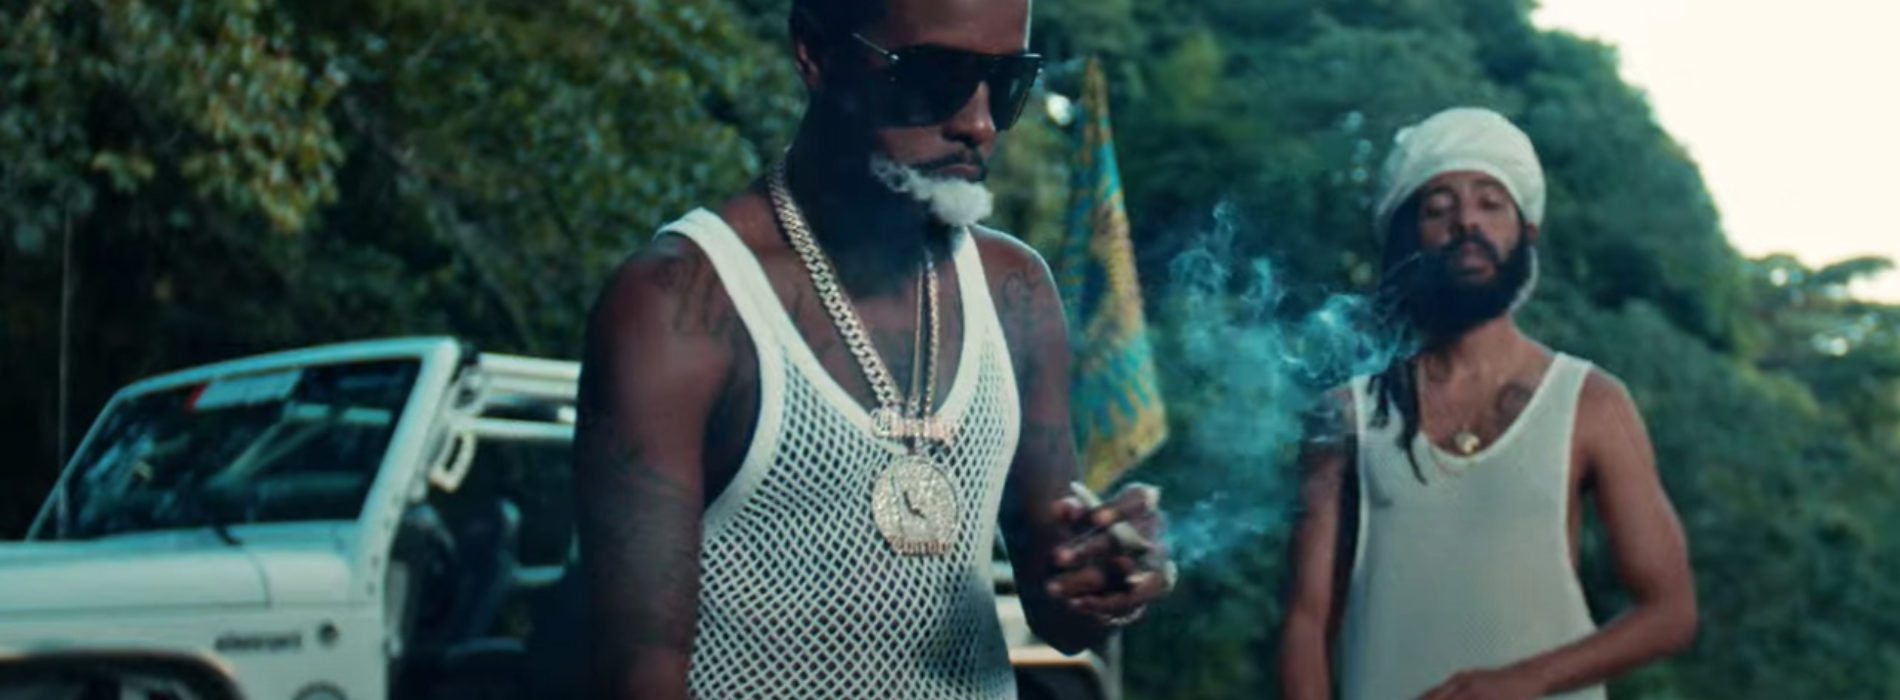 Protoje – Like Royalty (Official Video) ft. Popcaan – Août 2020